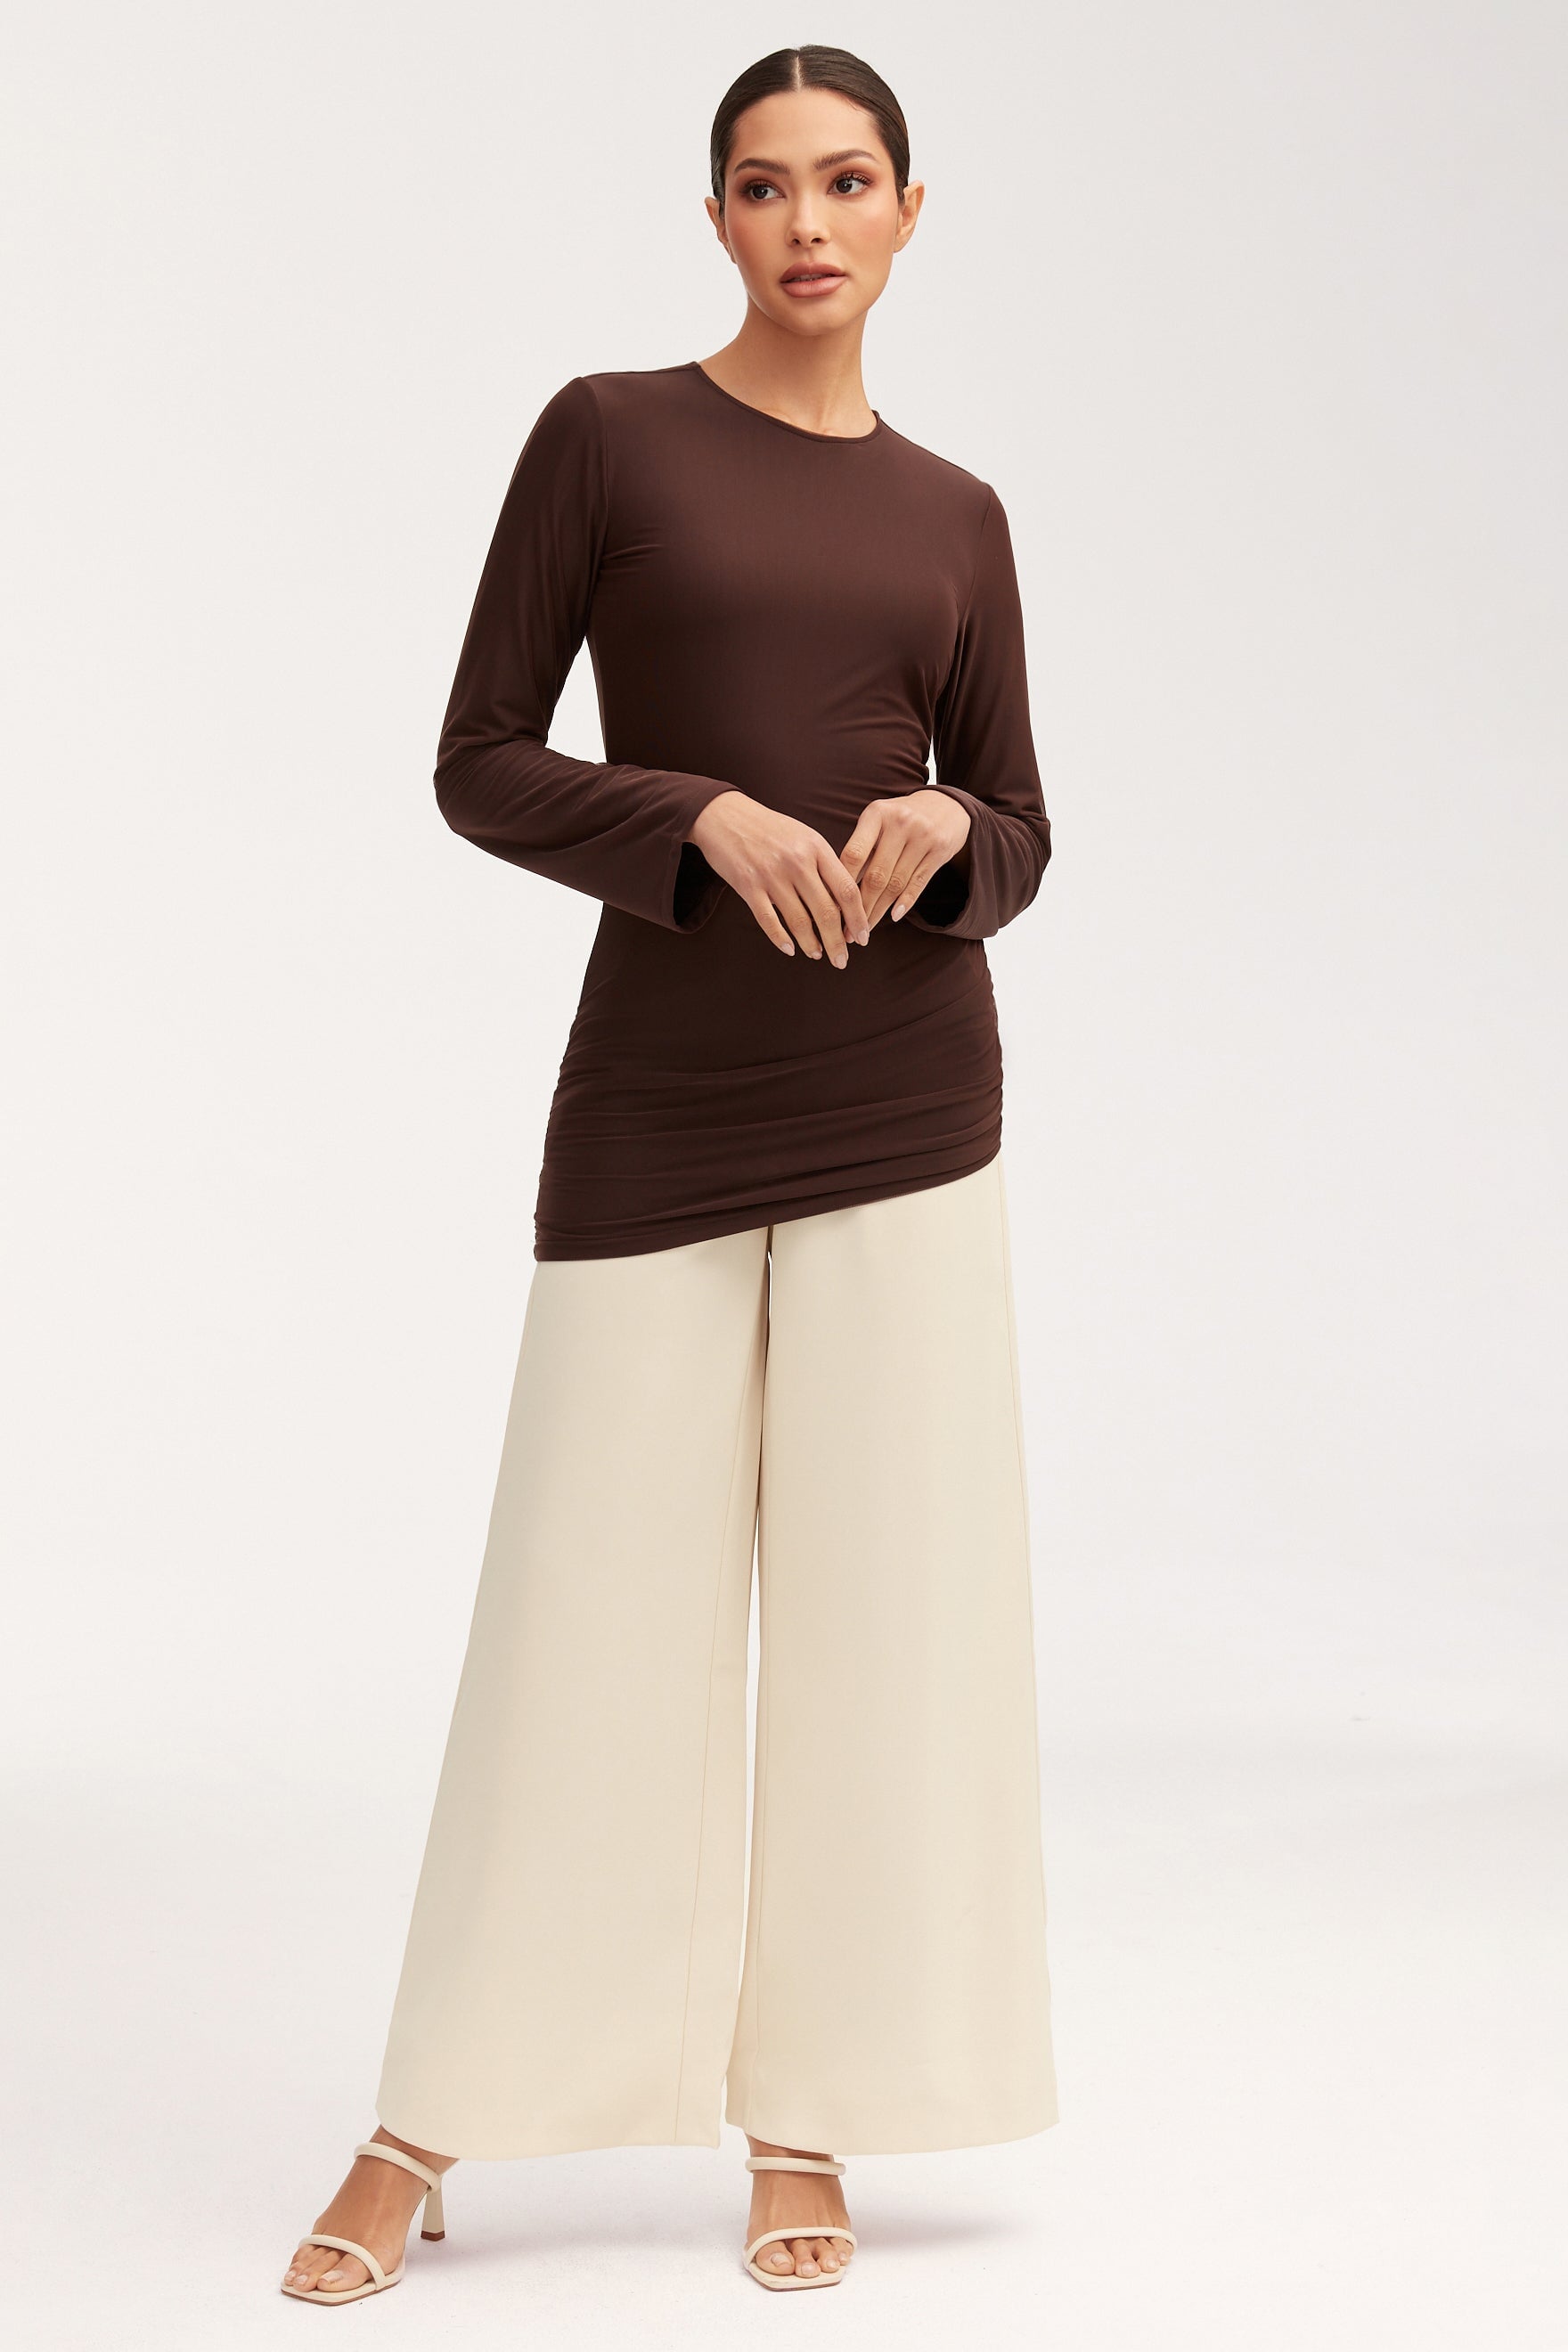 Mesh Rouched Top - Chocolate Plum Tops epschoolboard 